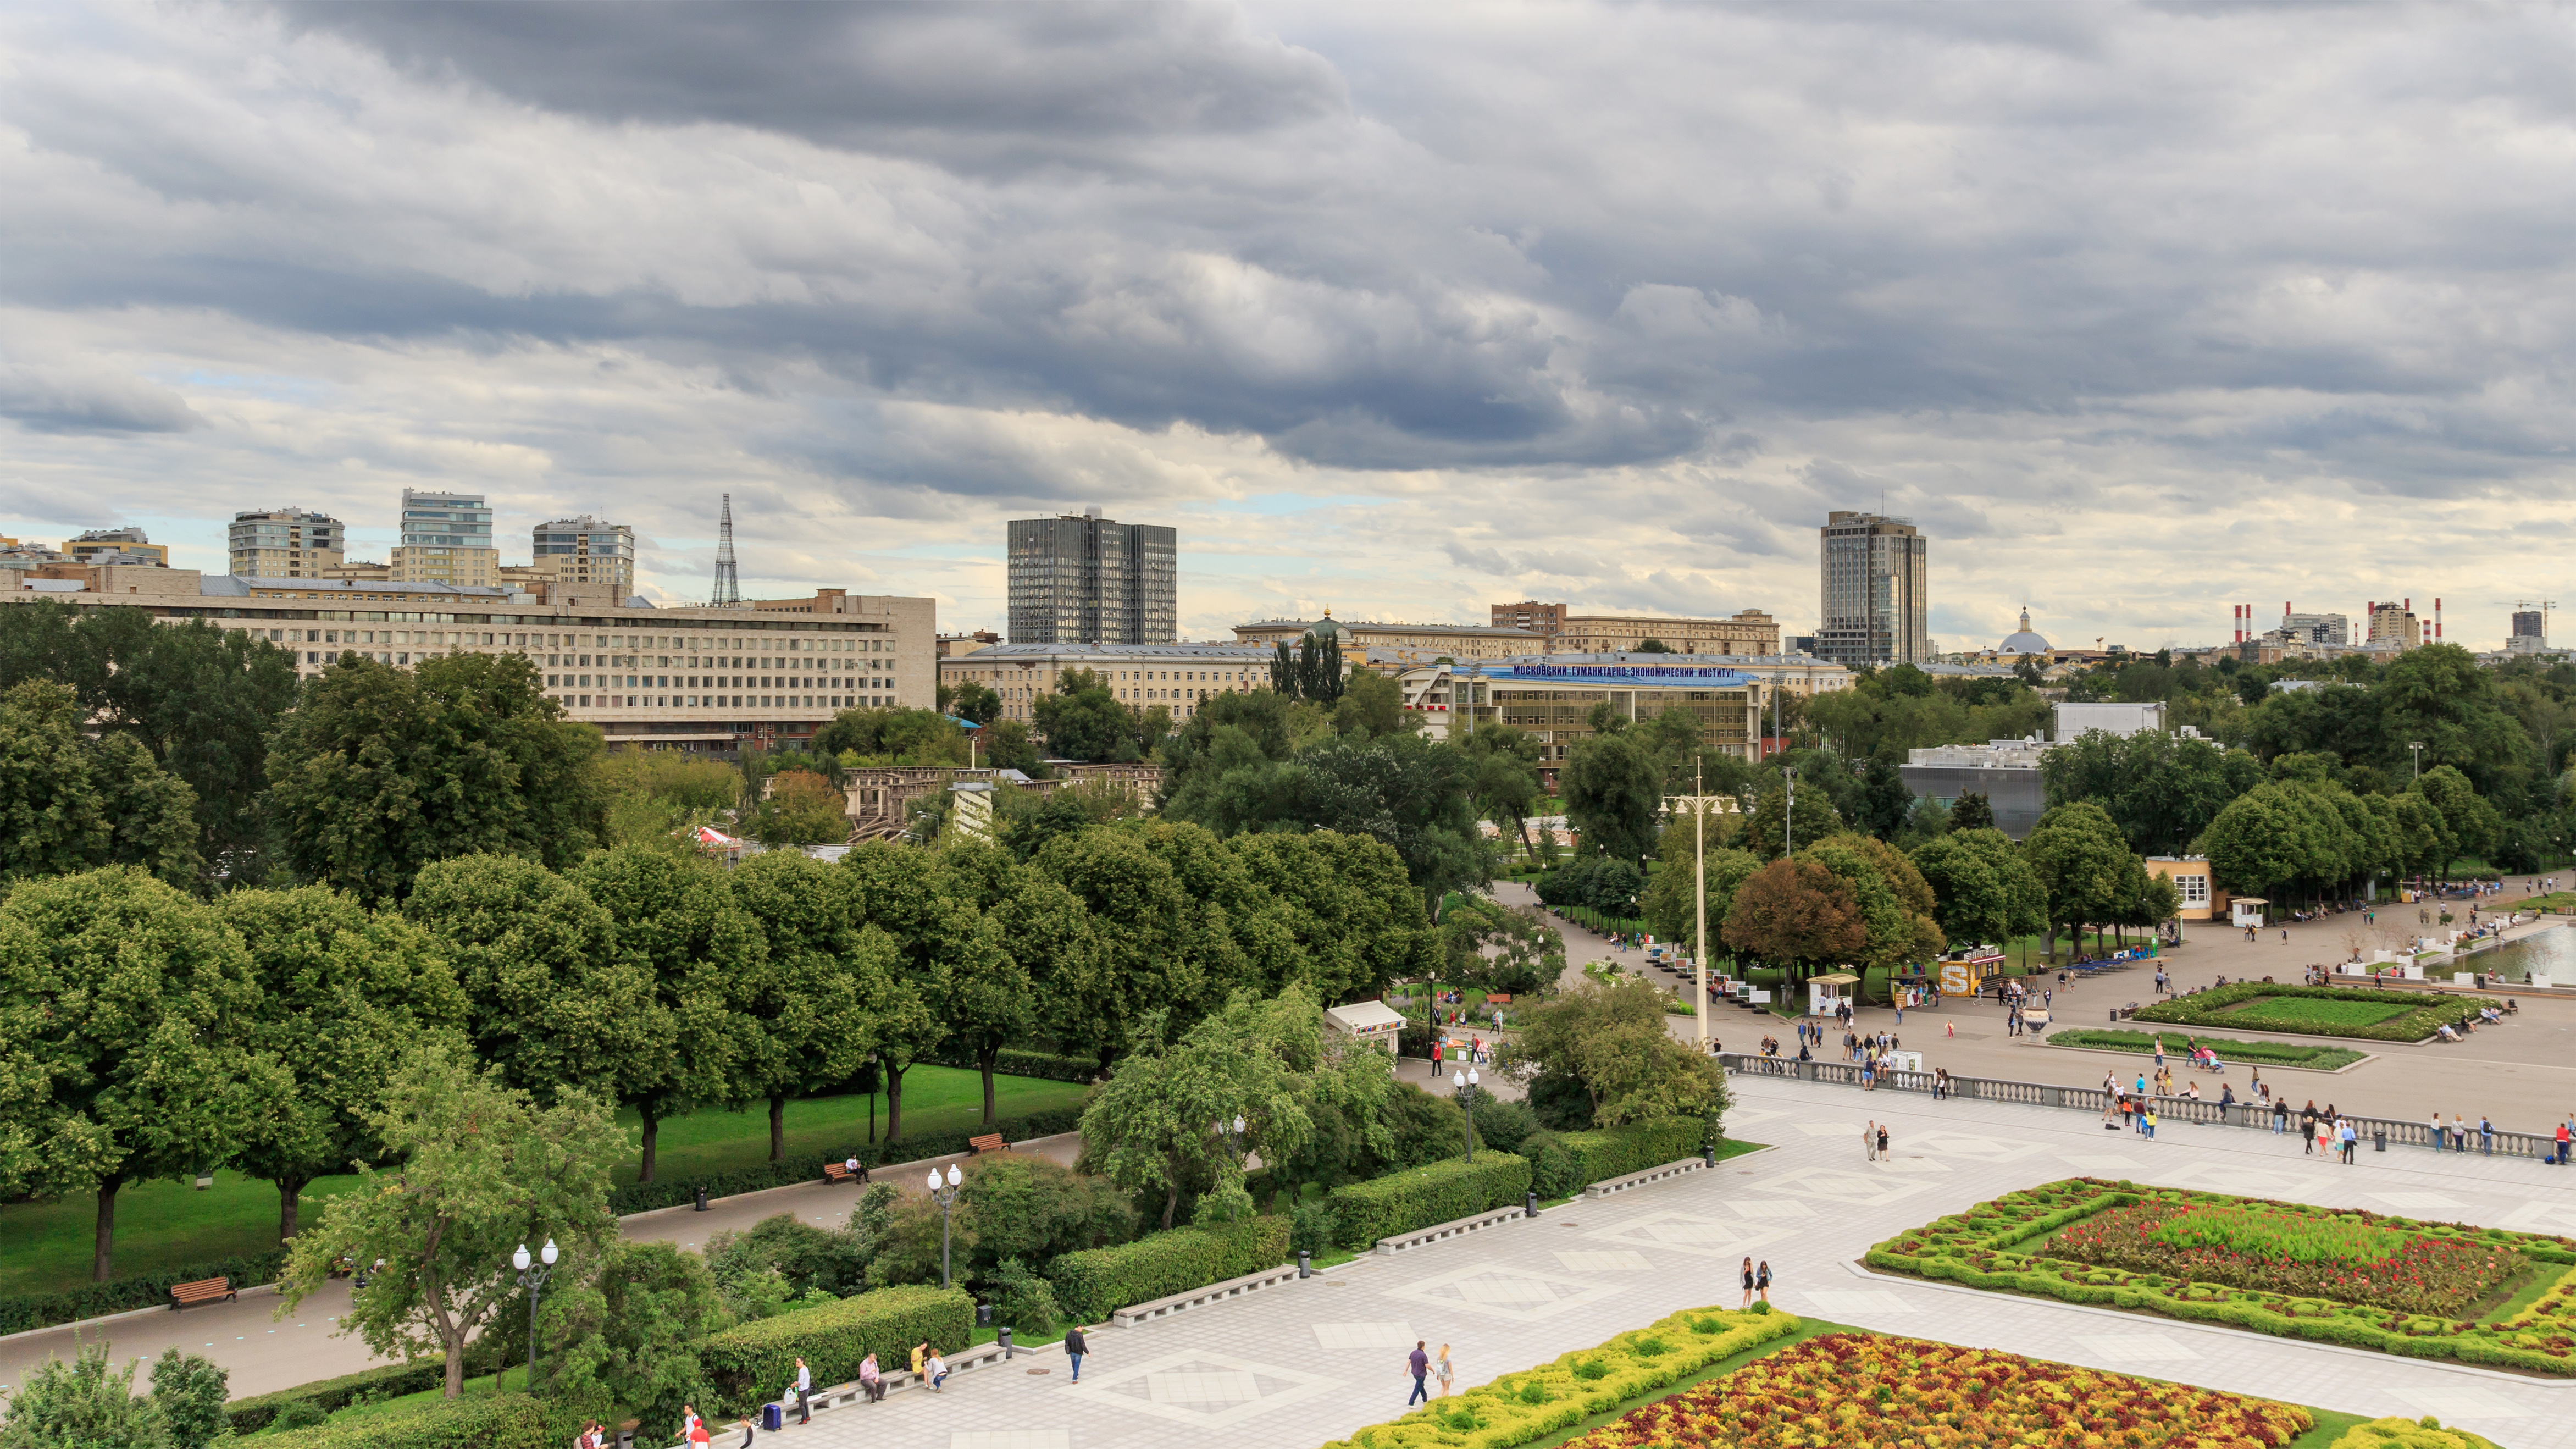 Moscow Gorky Park colonnades viewpoint 08-2016 img4